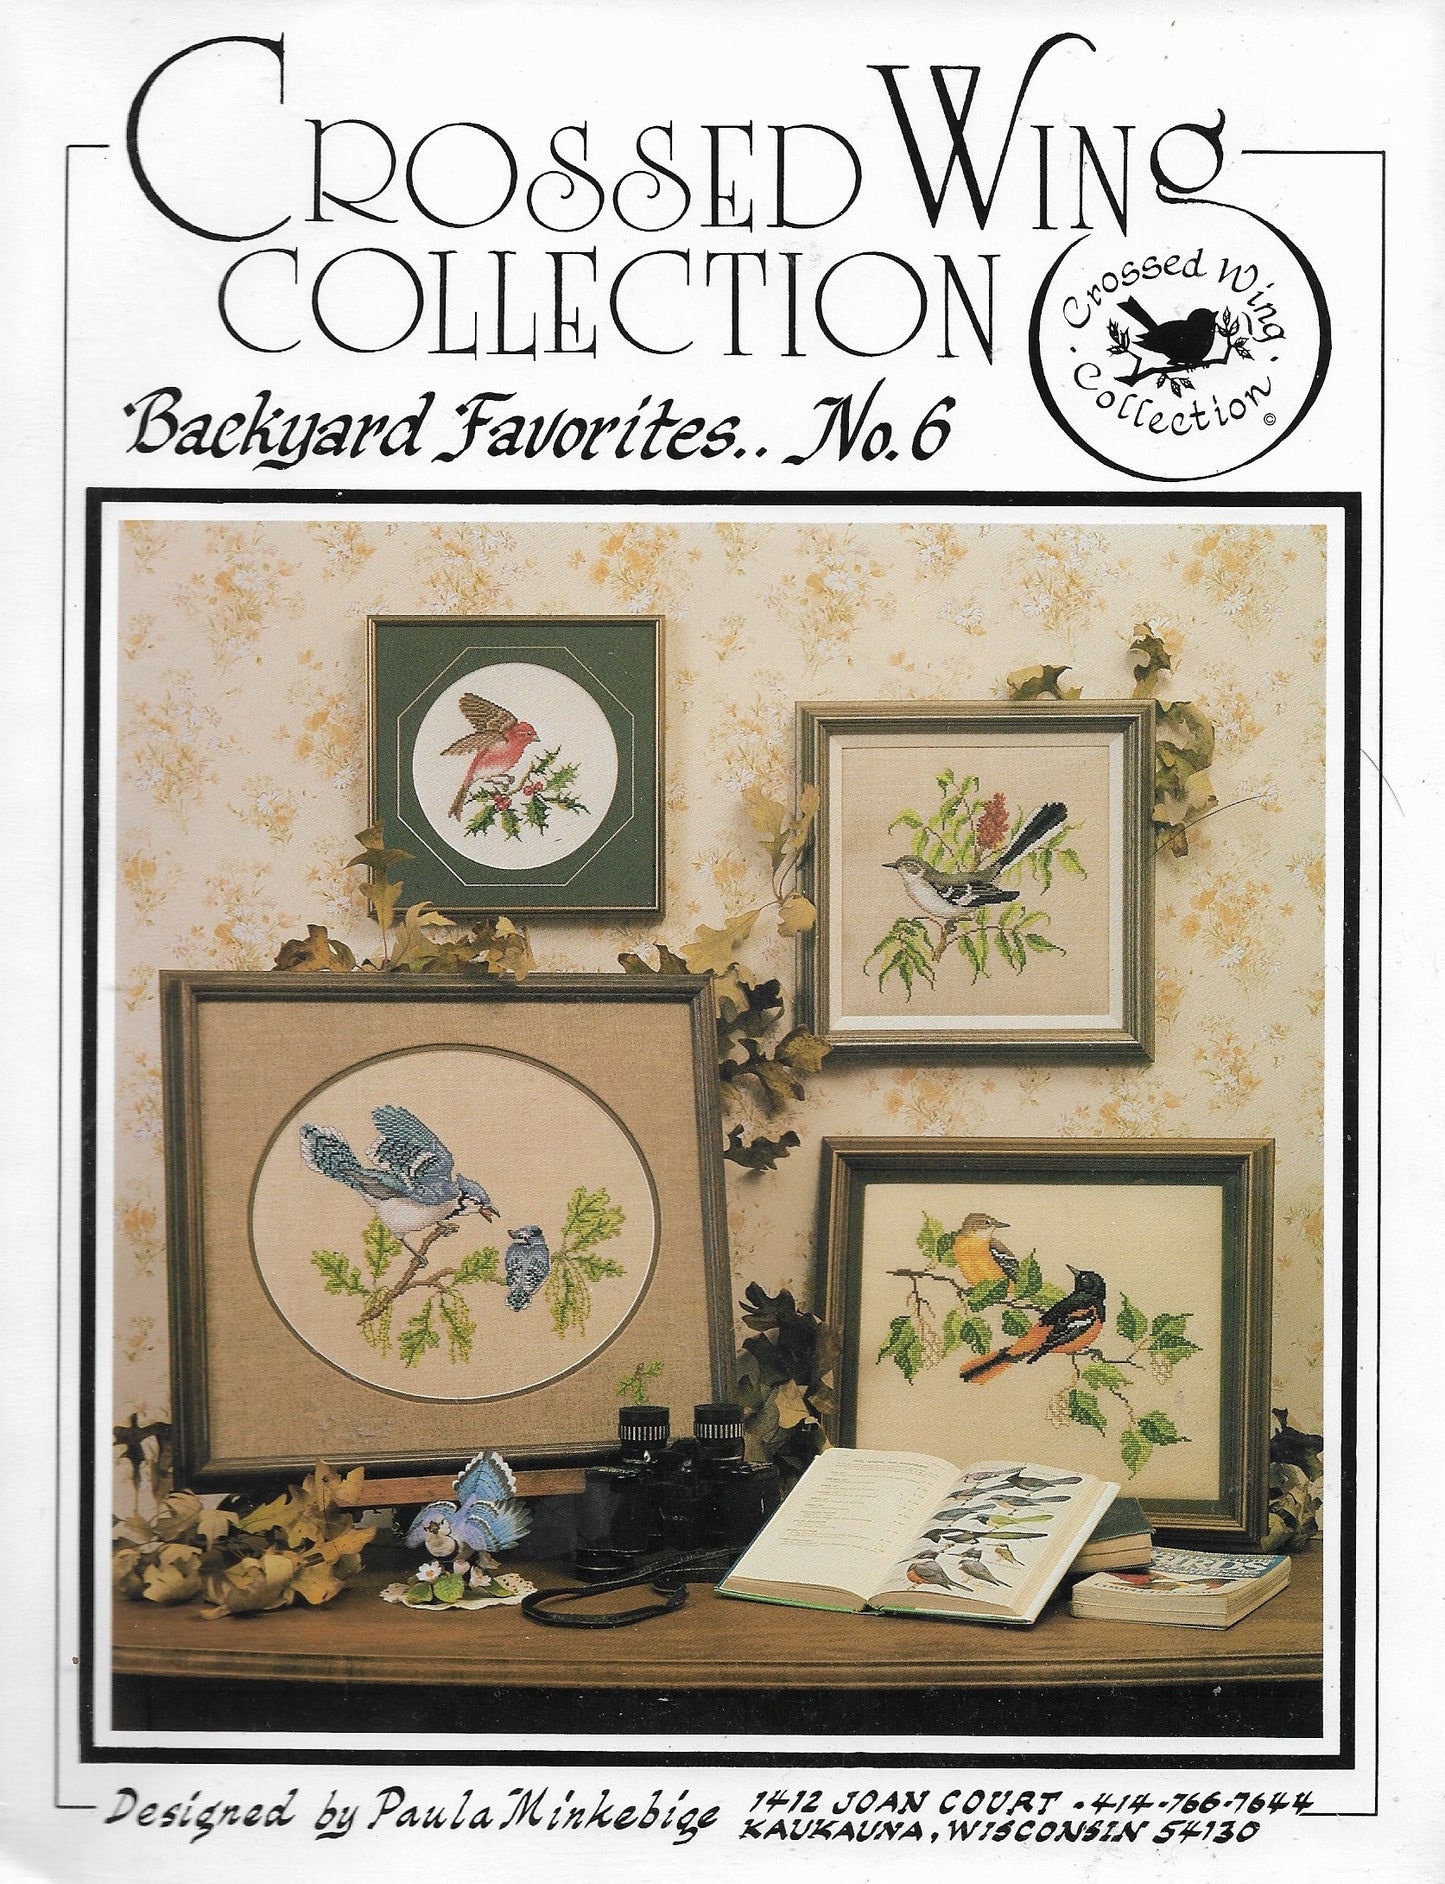 Crossed Wing Collection Backyard Favorites No. 6 cross stitch pattern